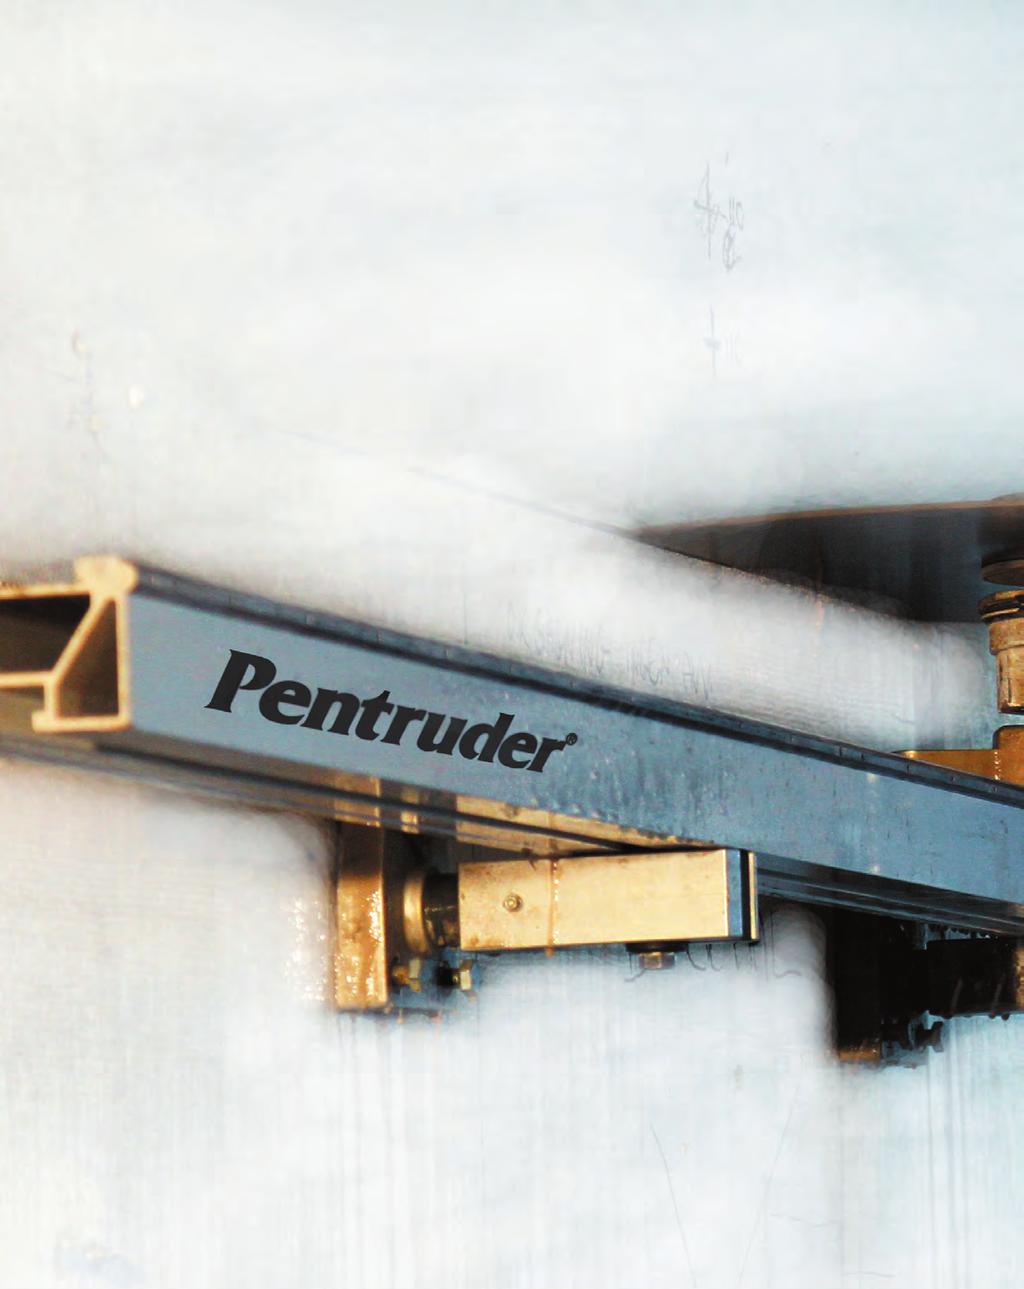 The Pentruder high frequency wall saws offer Pentruder